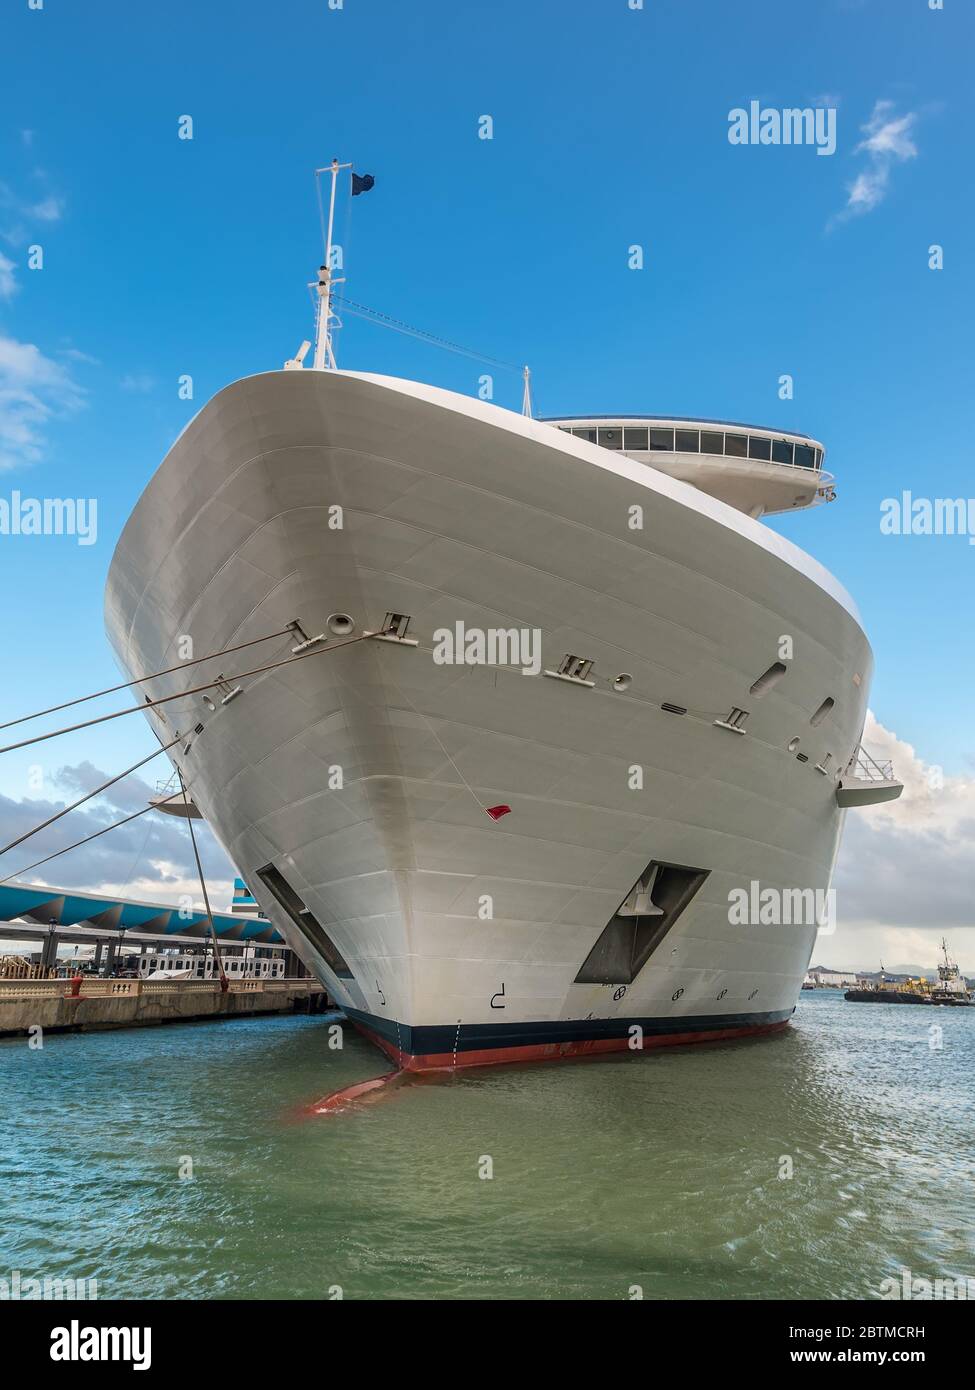 Cruise ship docked in tropical port. Cruise vacation. Stock Photo